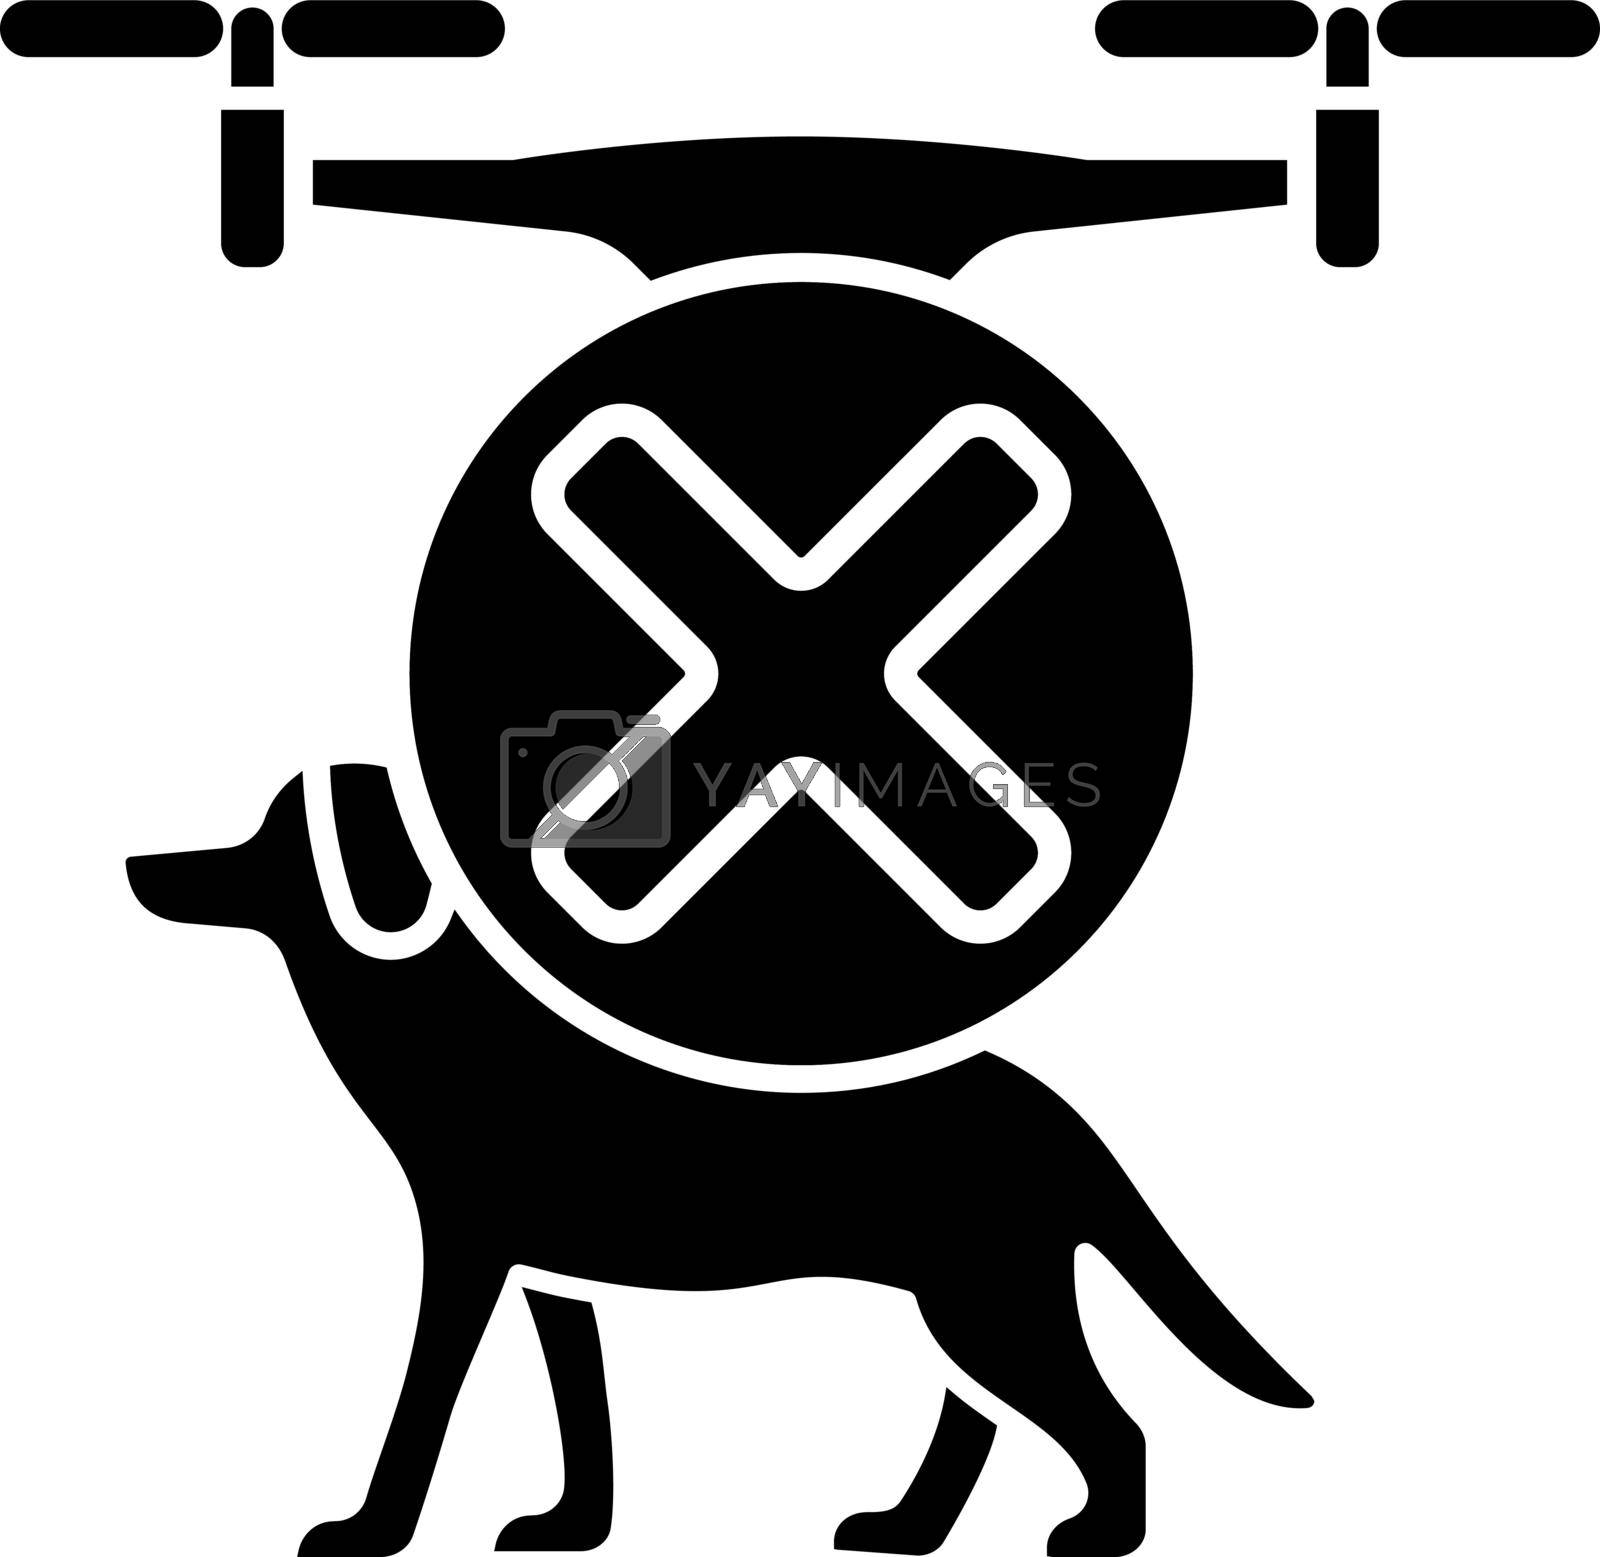 Dont fly above animals black glyph manual label icon. Safety rule for drone. Minimize pet disturbance. Silhouette symbol on white space. Vector isolated illustration for product use instructions